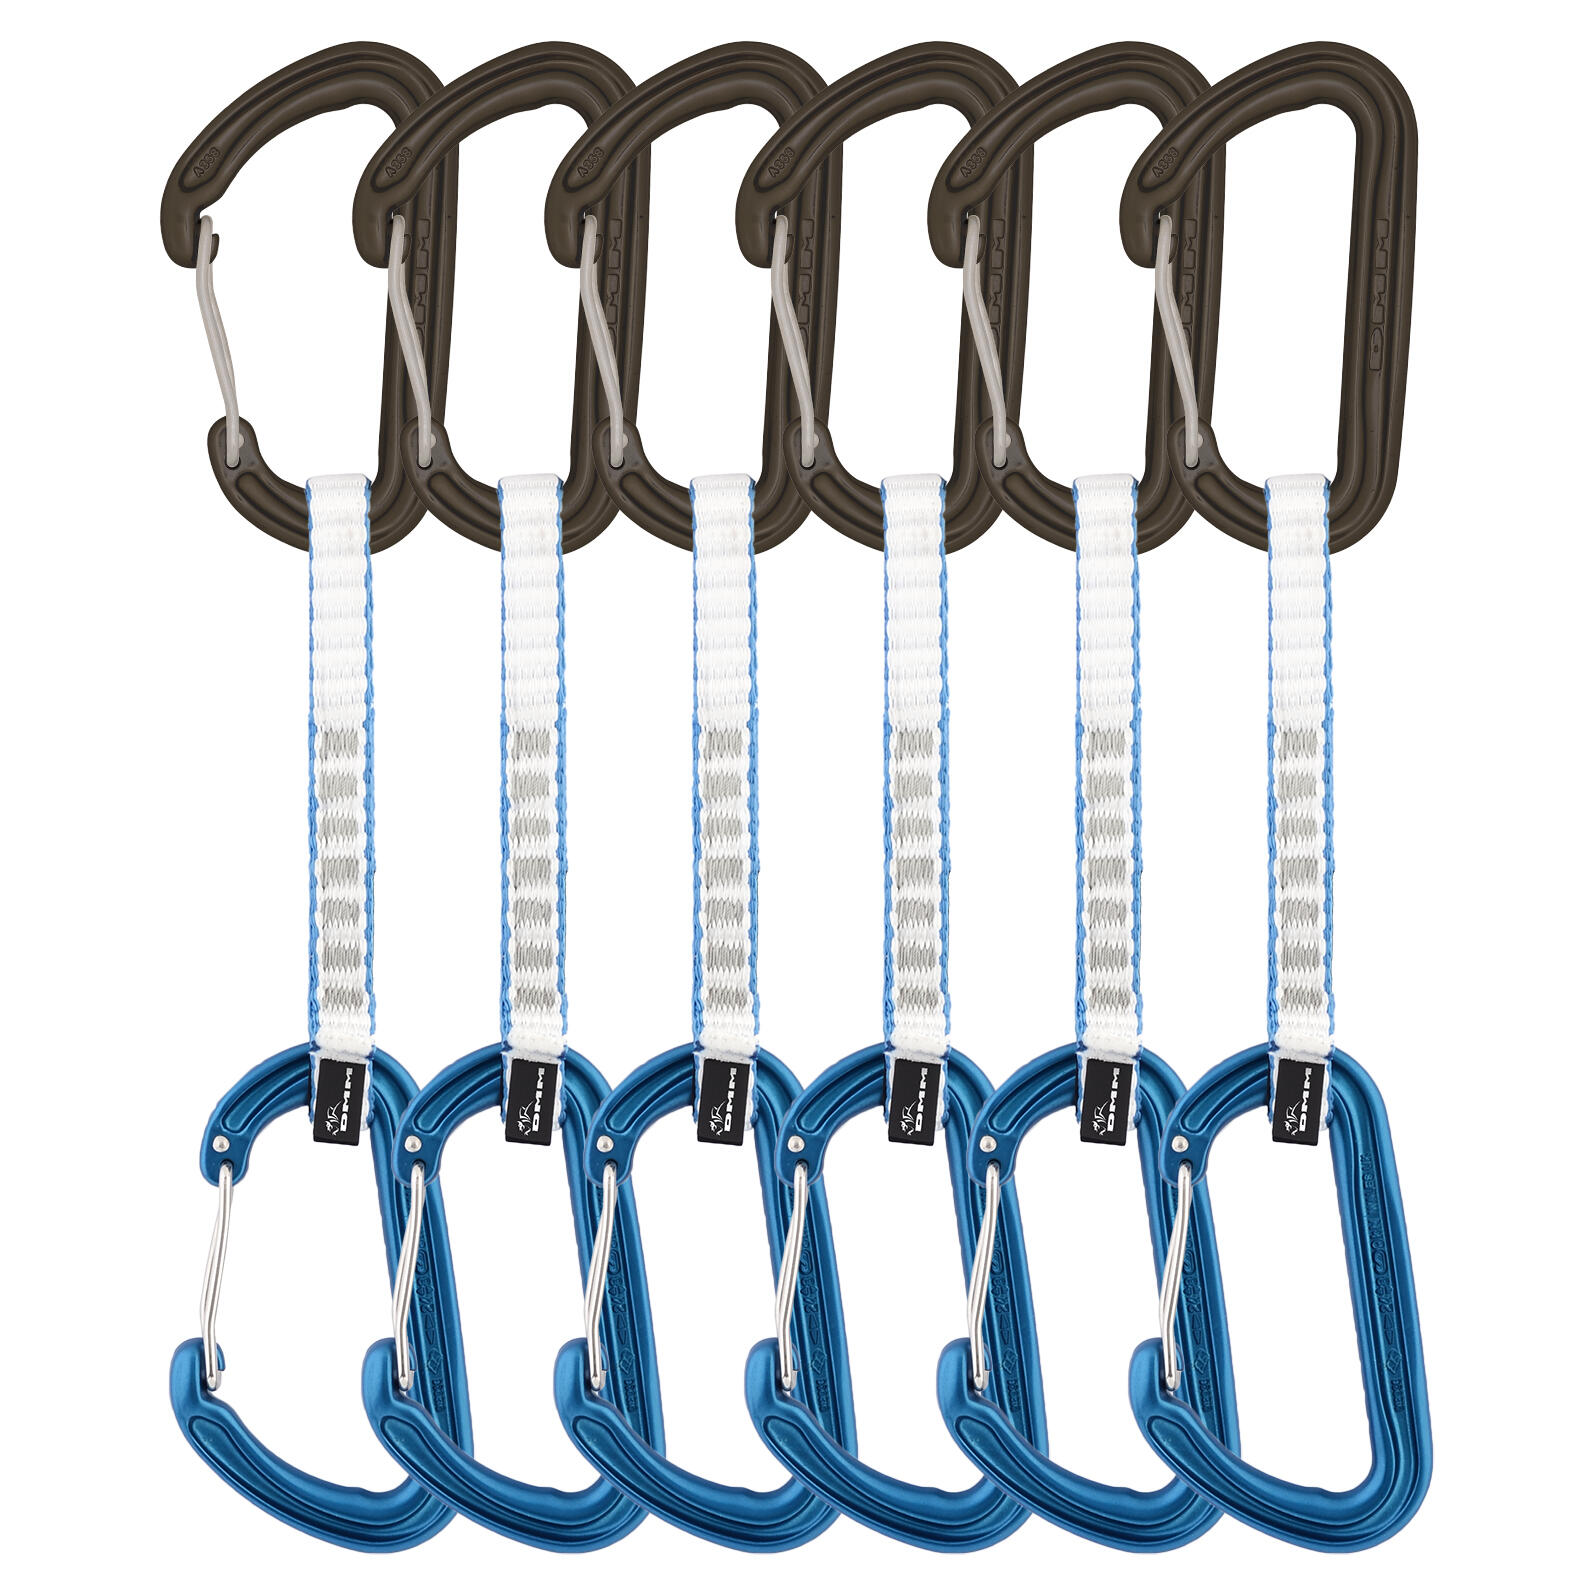 Spectre Quickdraw 12cm - Blue - 6 Pack 1/3